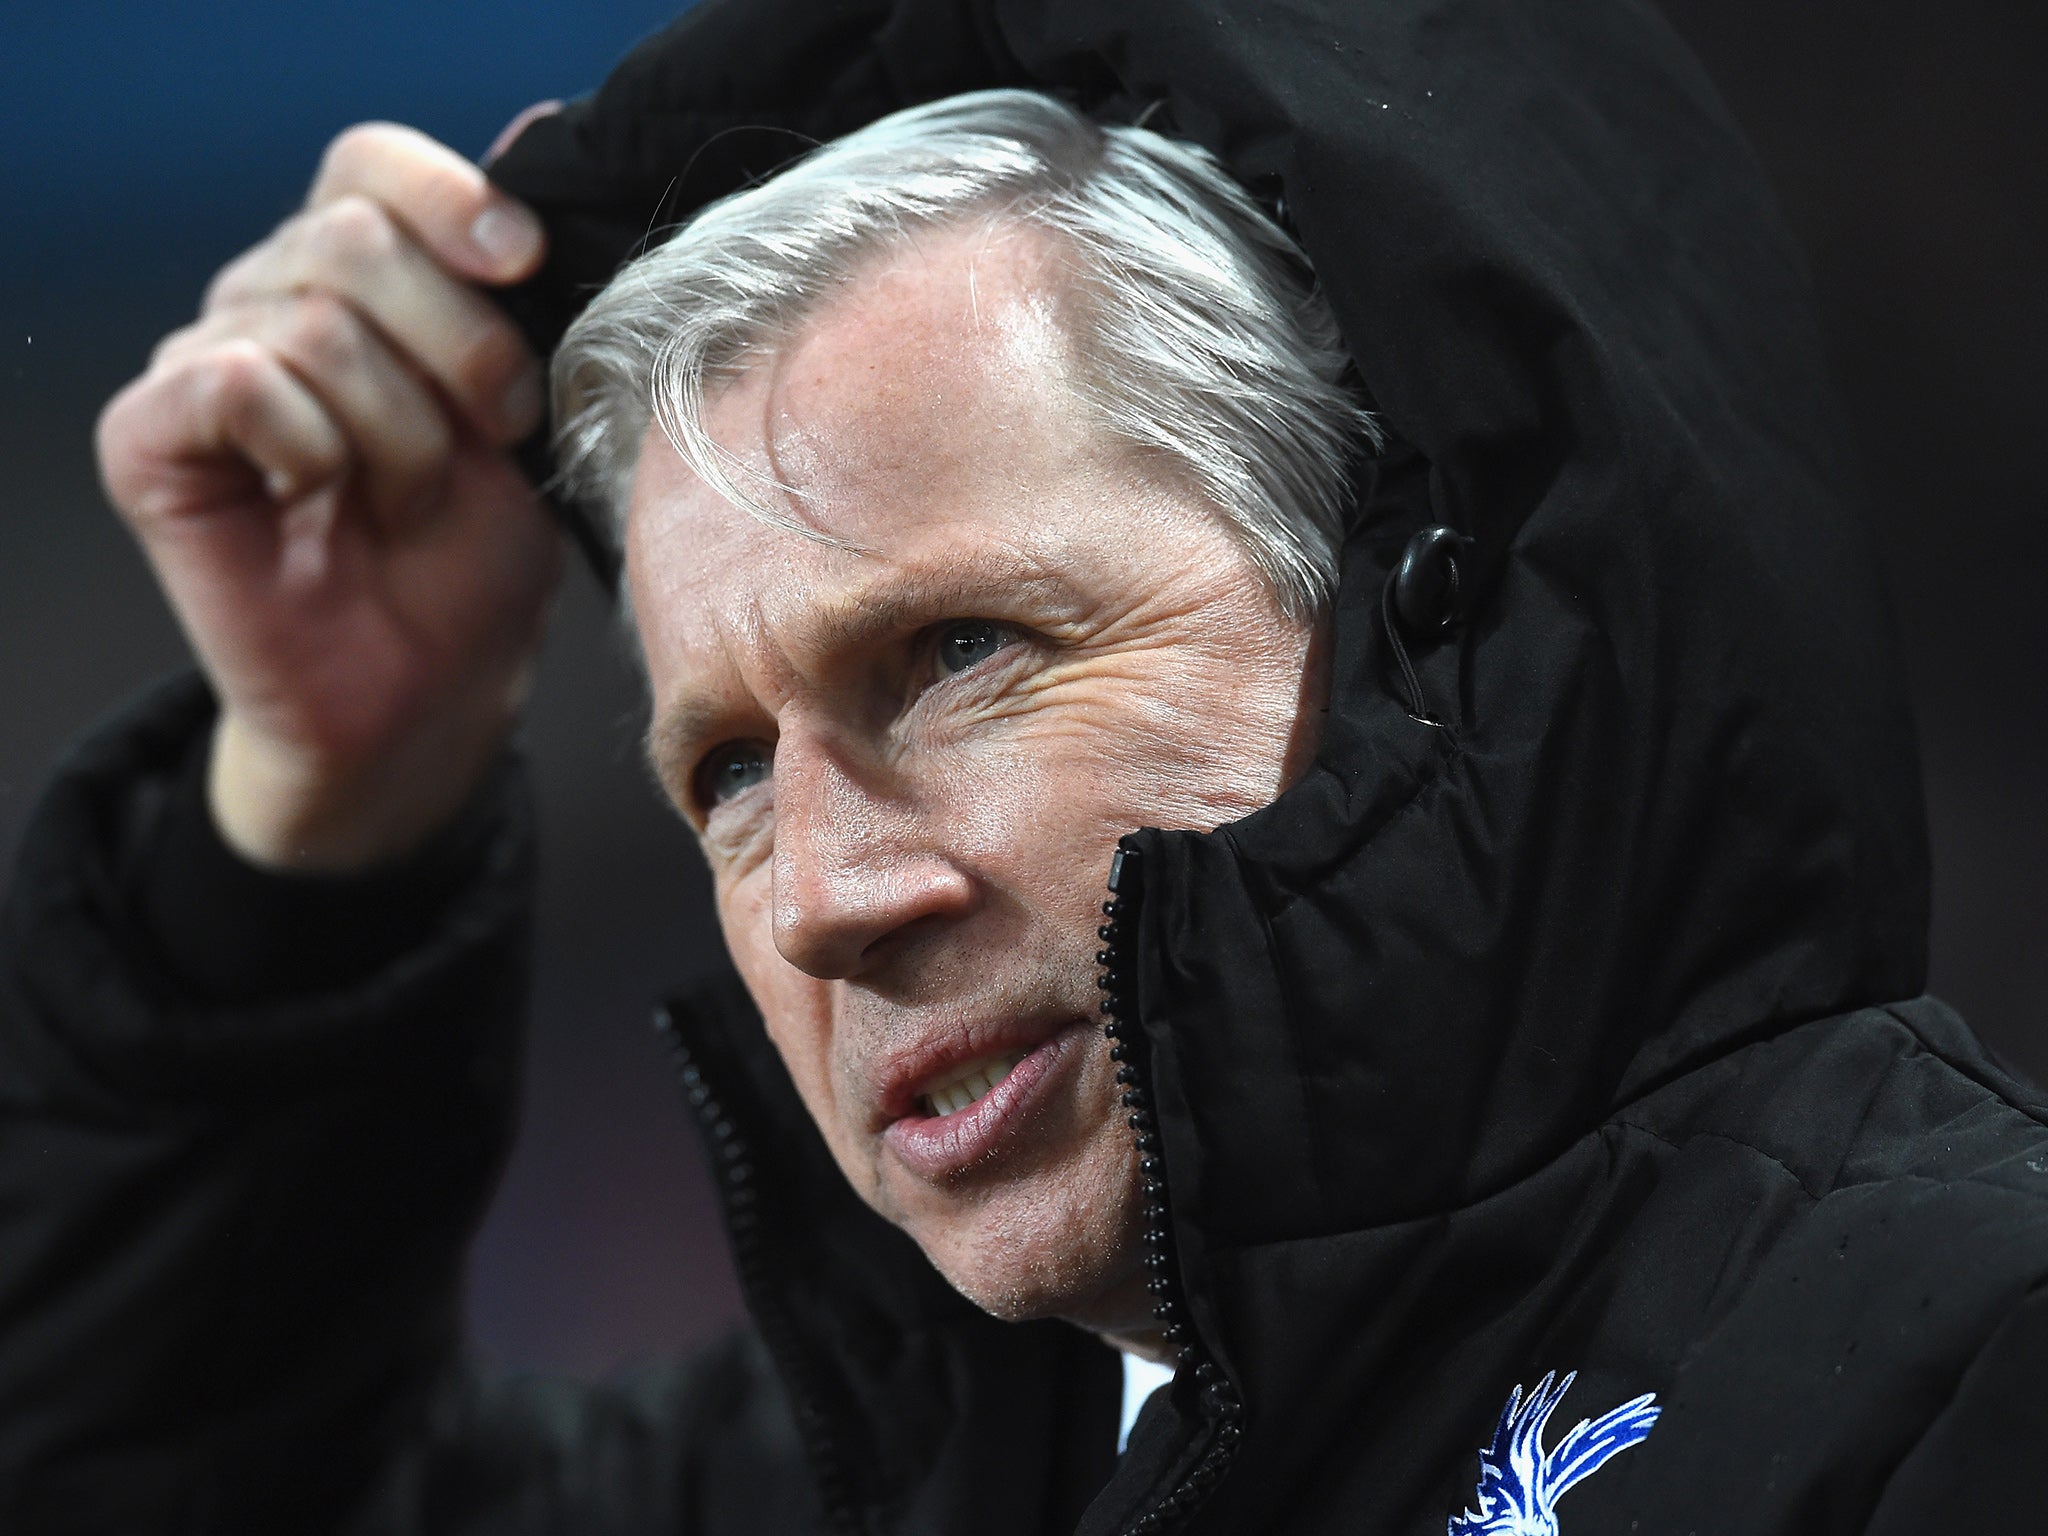 Crystal Palace manager Alan Pardew looks on disappointed during his side's defeat